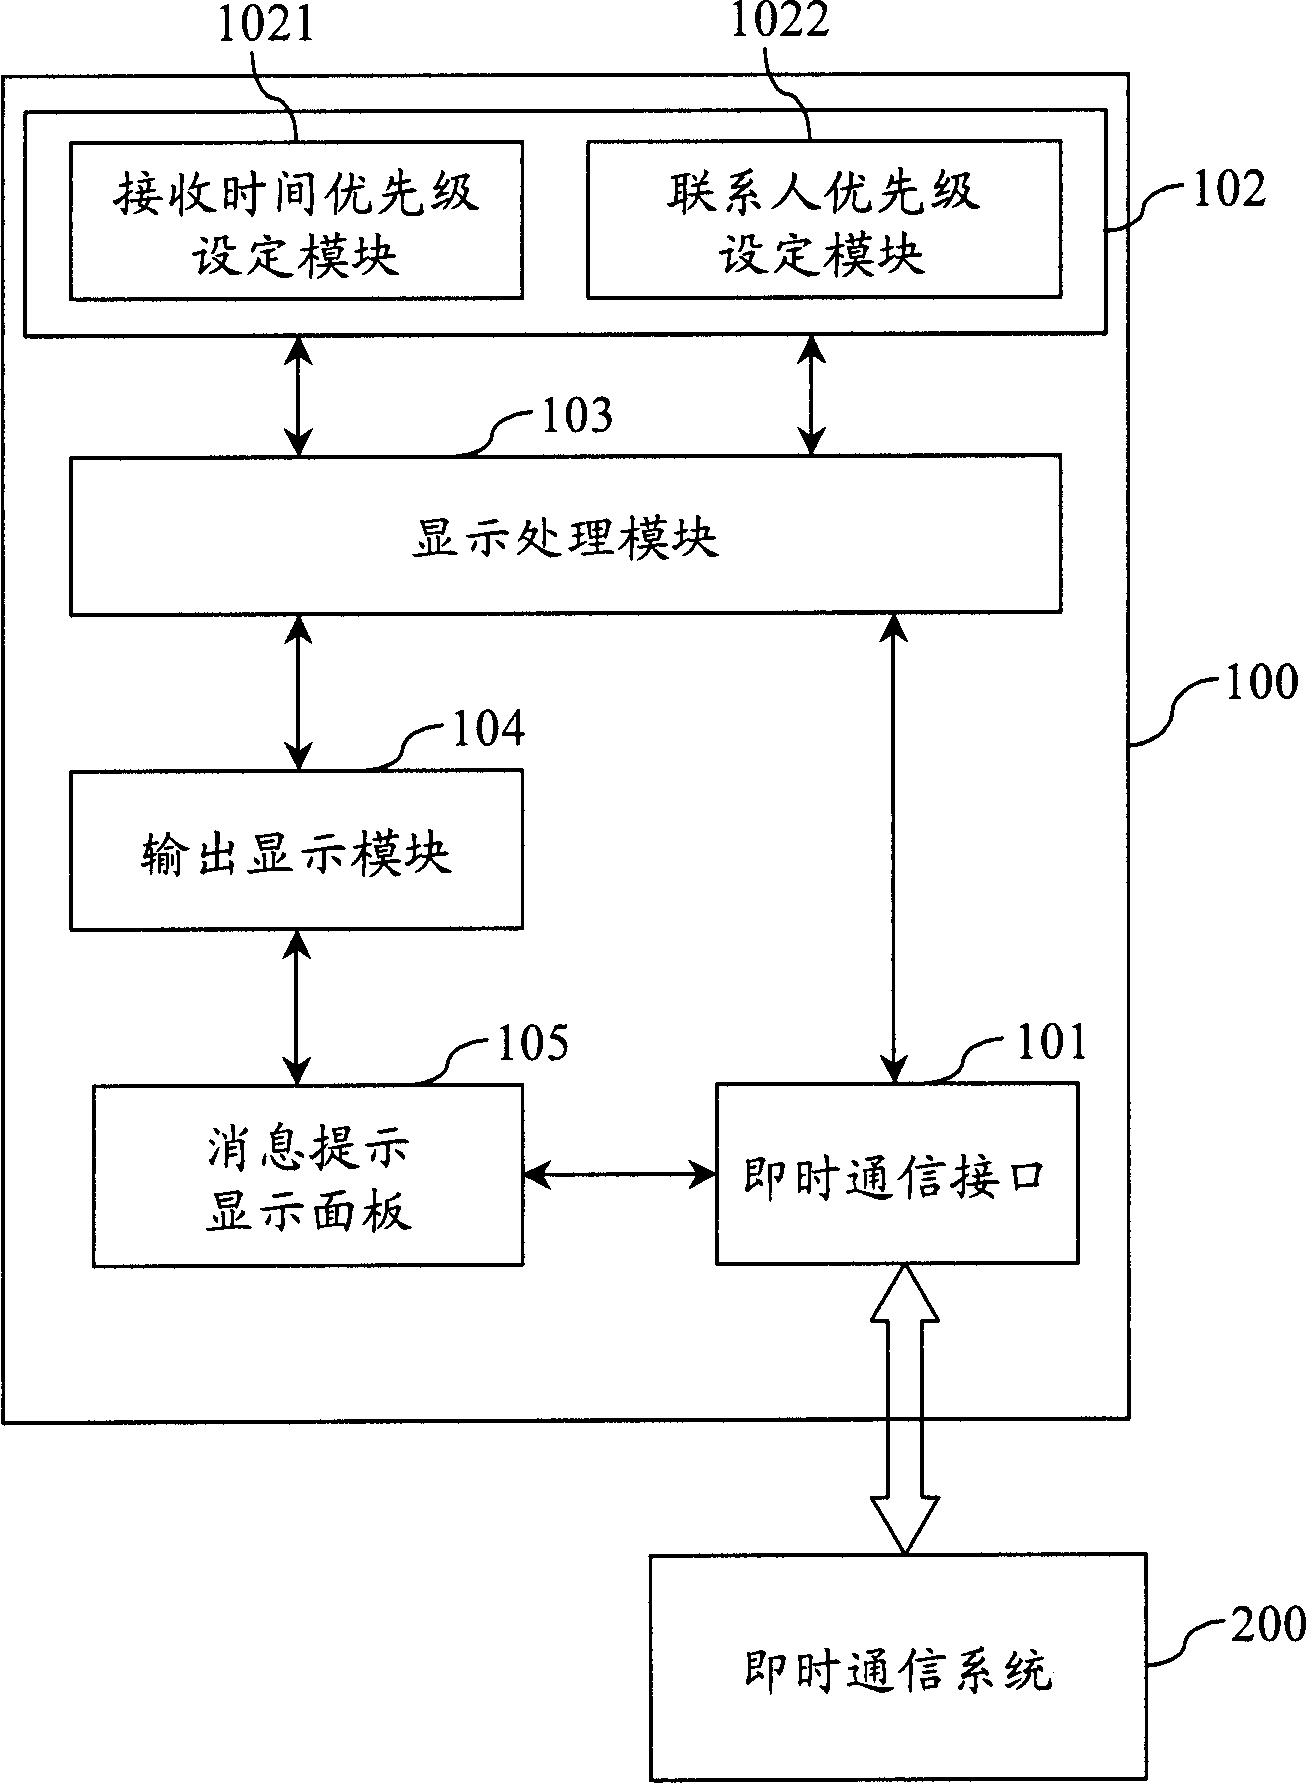 Instant communication message display managing system, method and display interface thereof